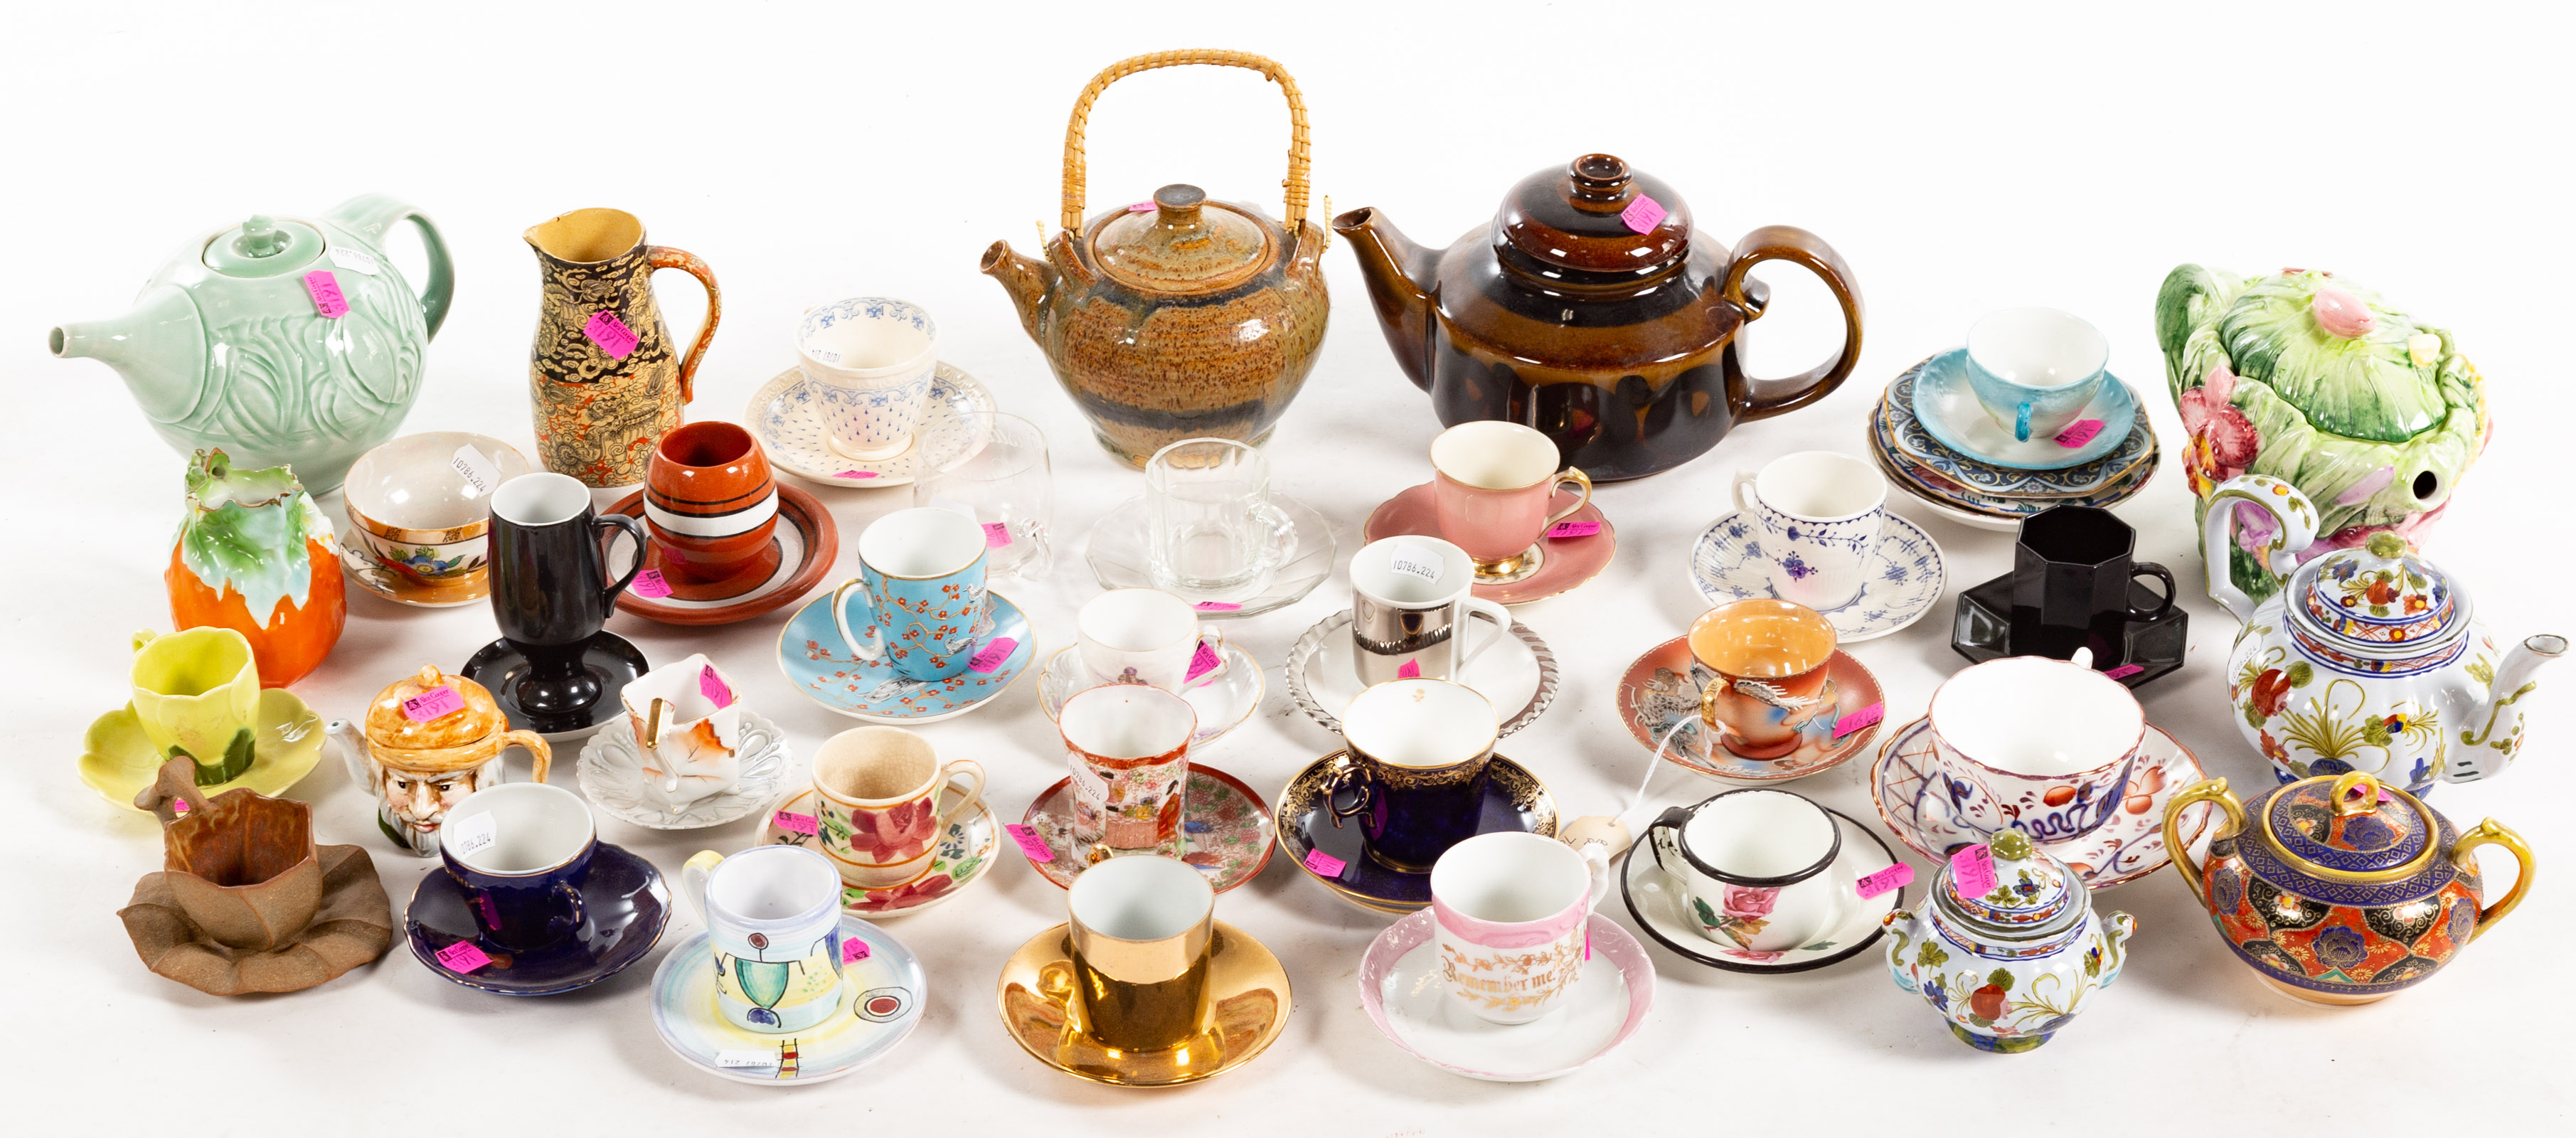 TEA TIME WITH ELEANOR A COLLECTION 2e9588